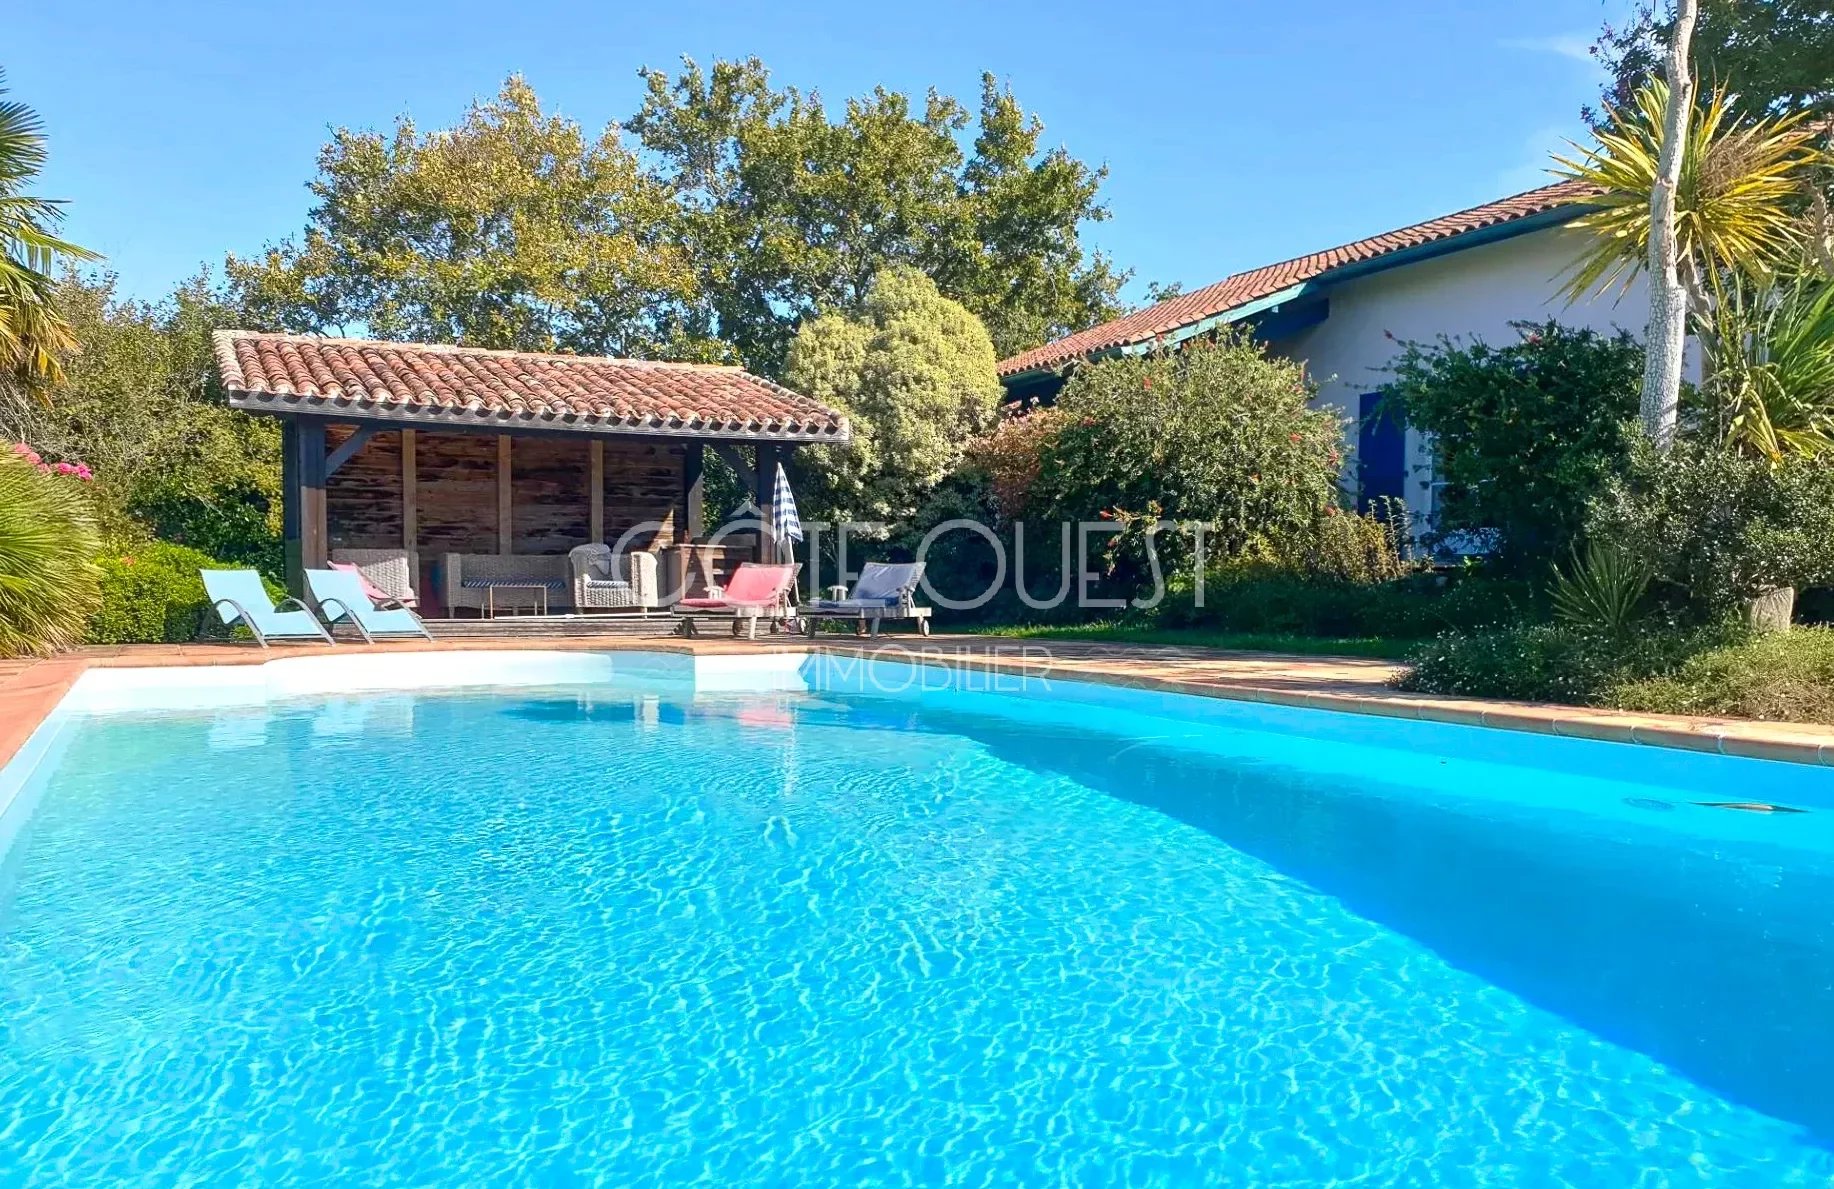 ARCANGUES, NEAR BIARRITZ – A PROPERTY IN EXTENSIVE GROUNDS